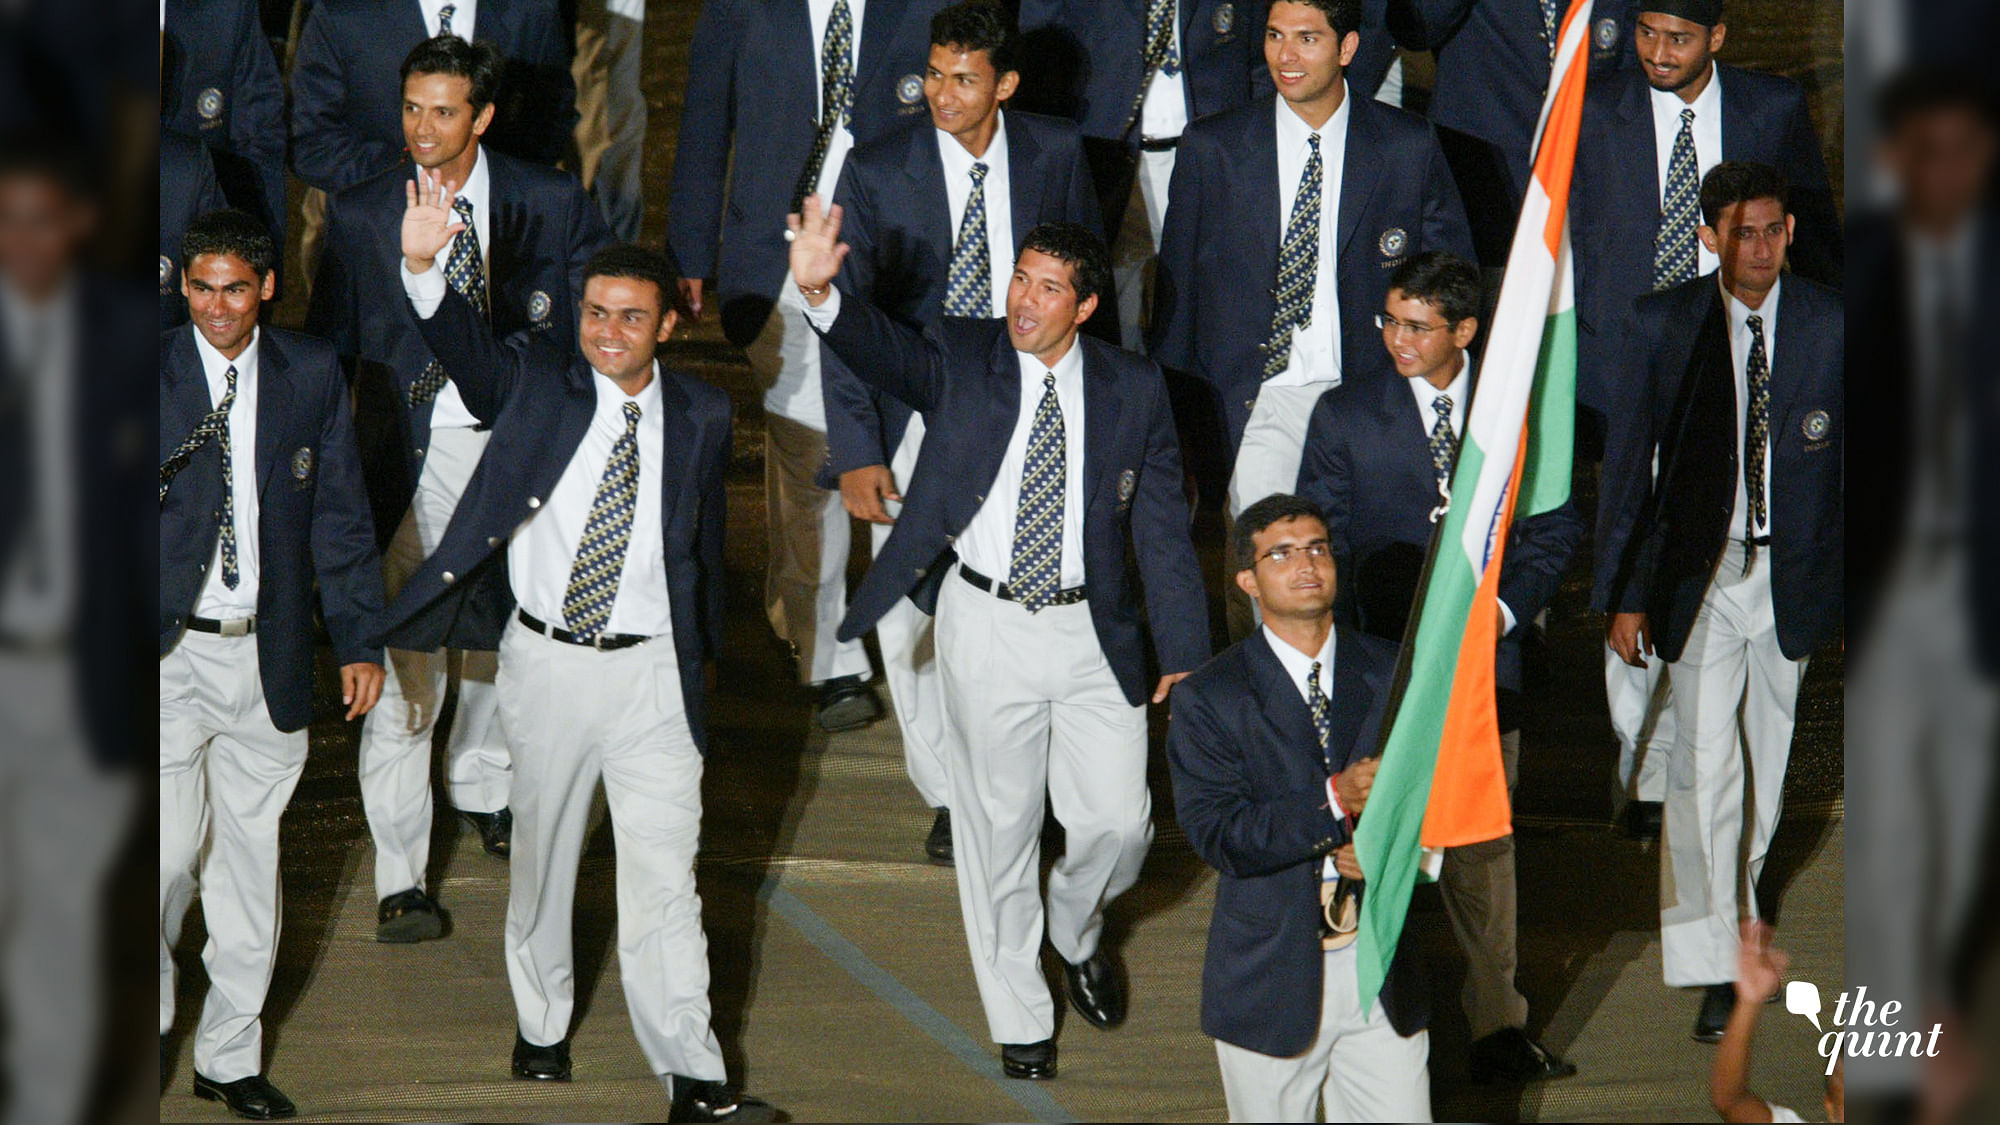 Captain Sourav Ganguly marching with the Indian tricolour during the 2003 World Cup opening ceremony.